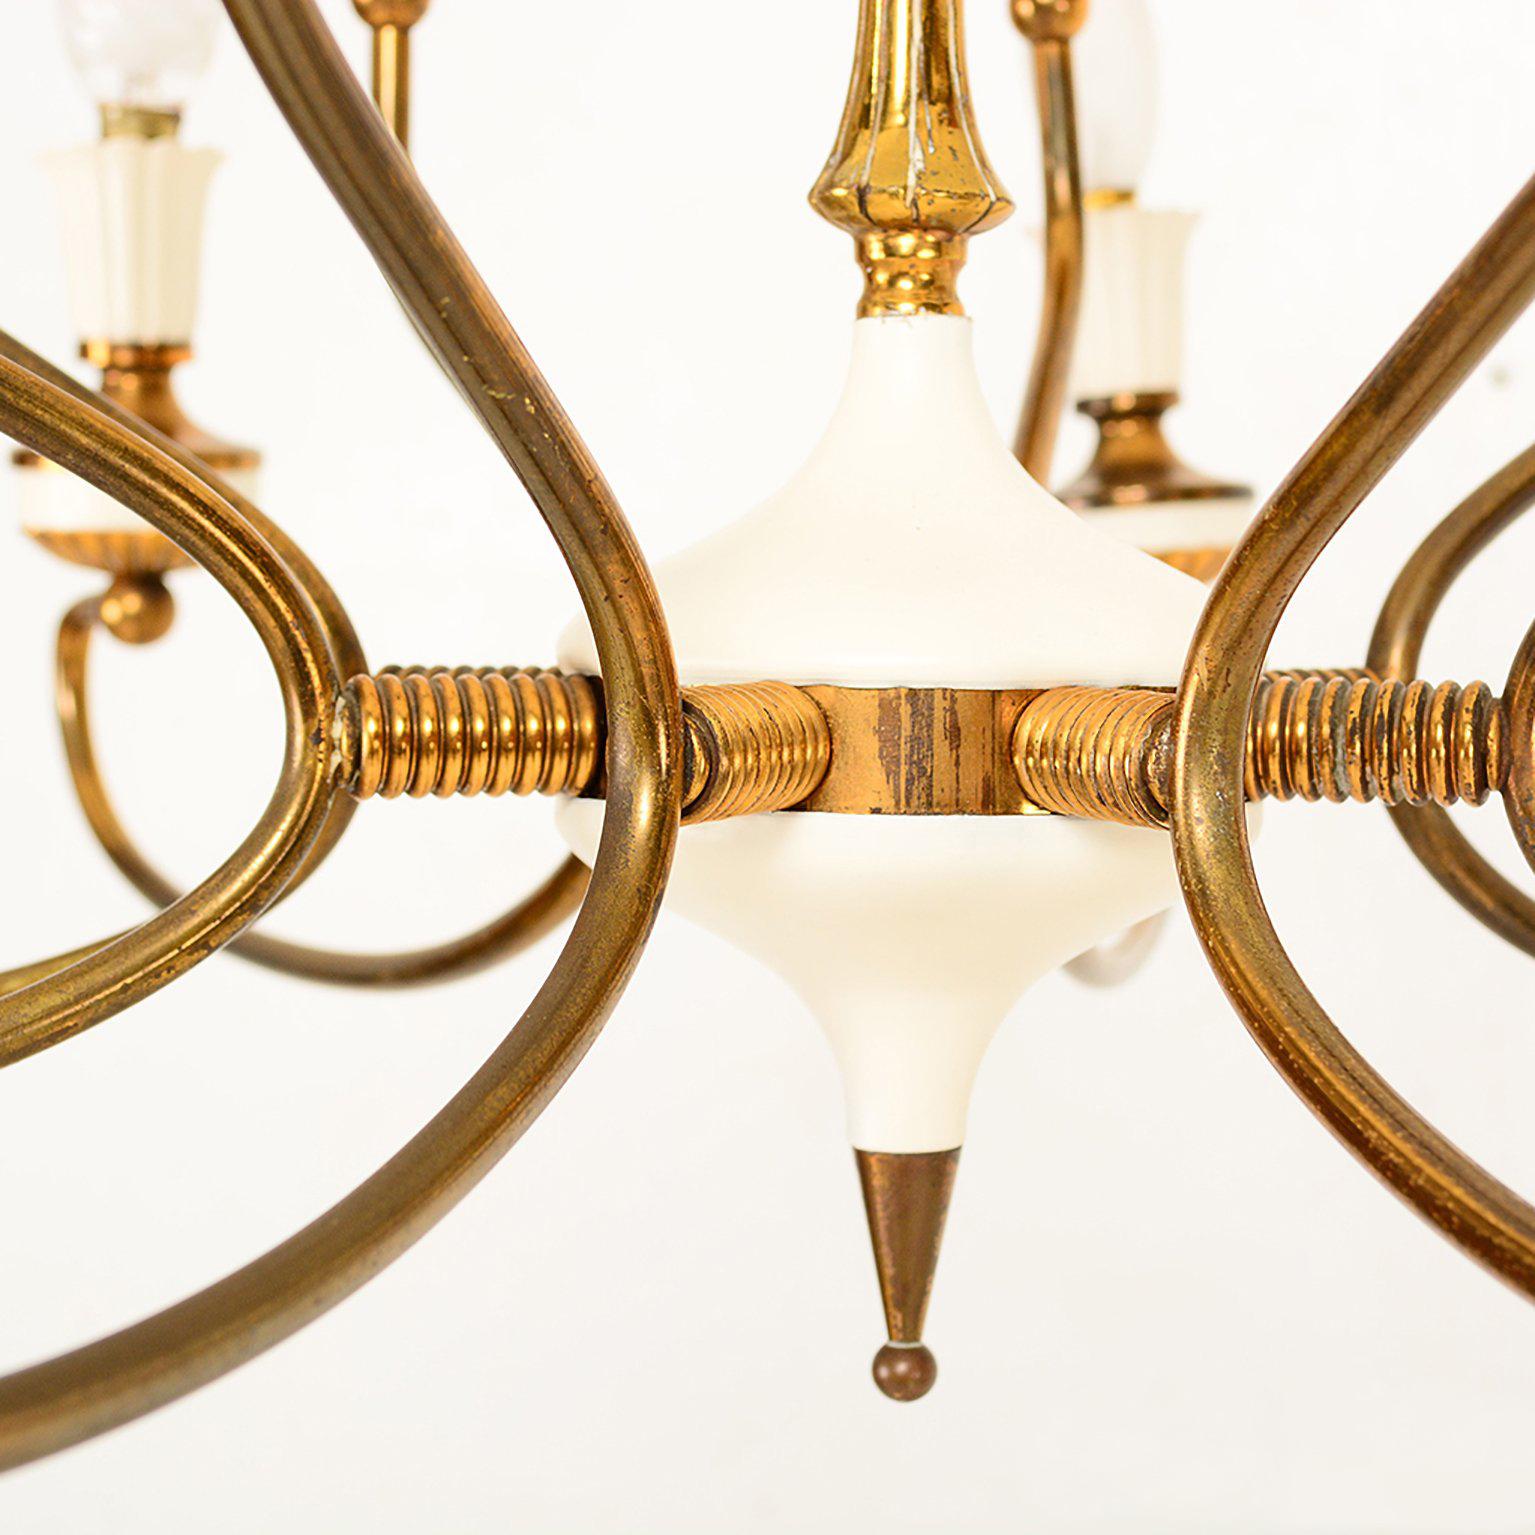 Painted Mid-Century Modern Italian Chandelier 16 Arms Two Tiers